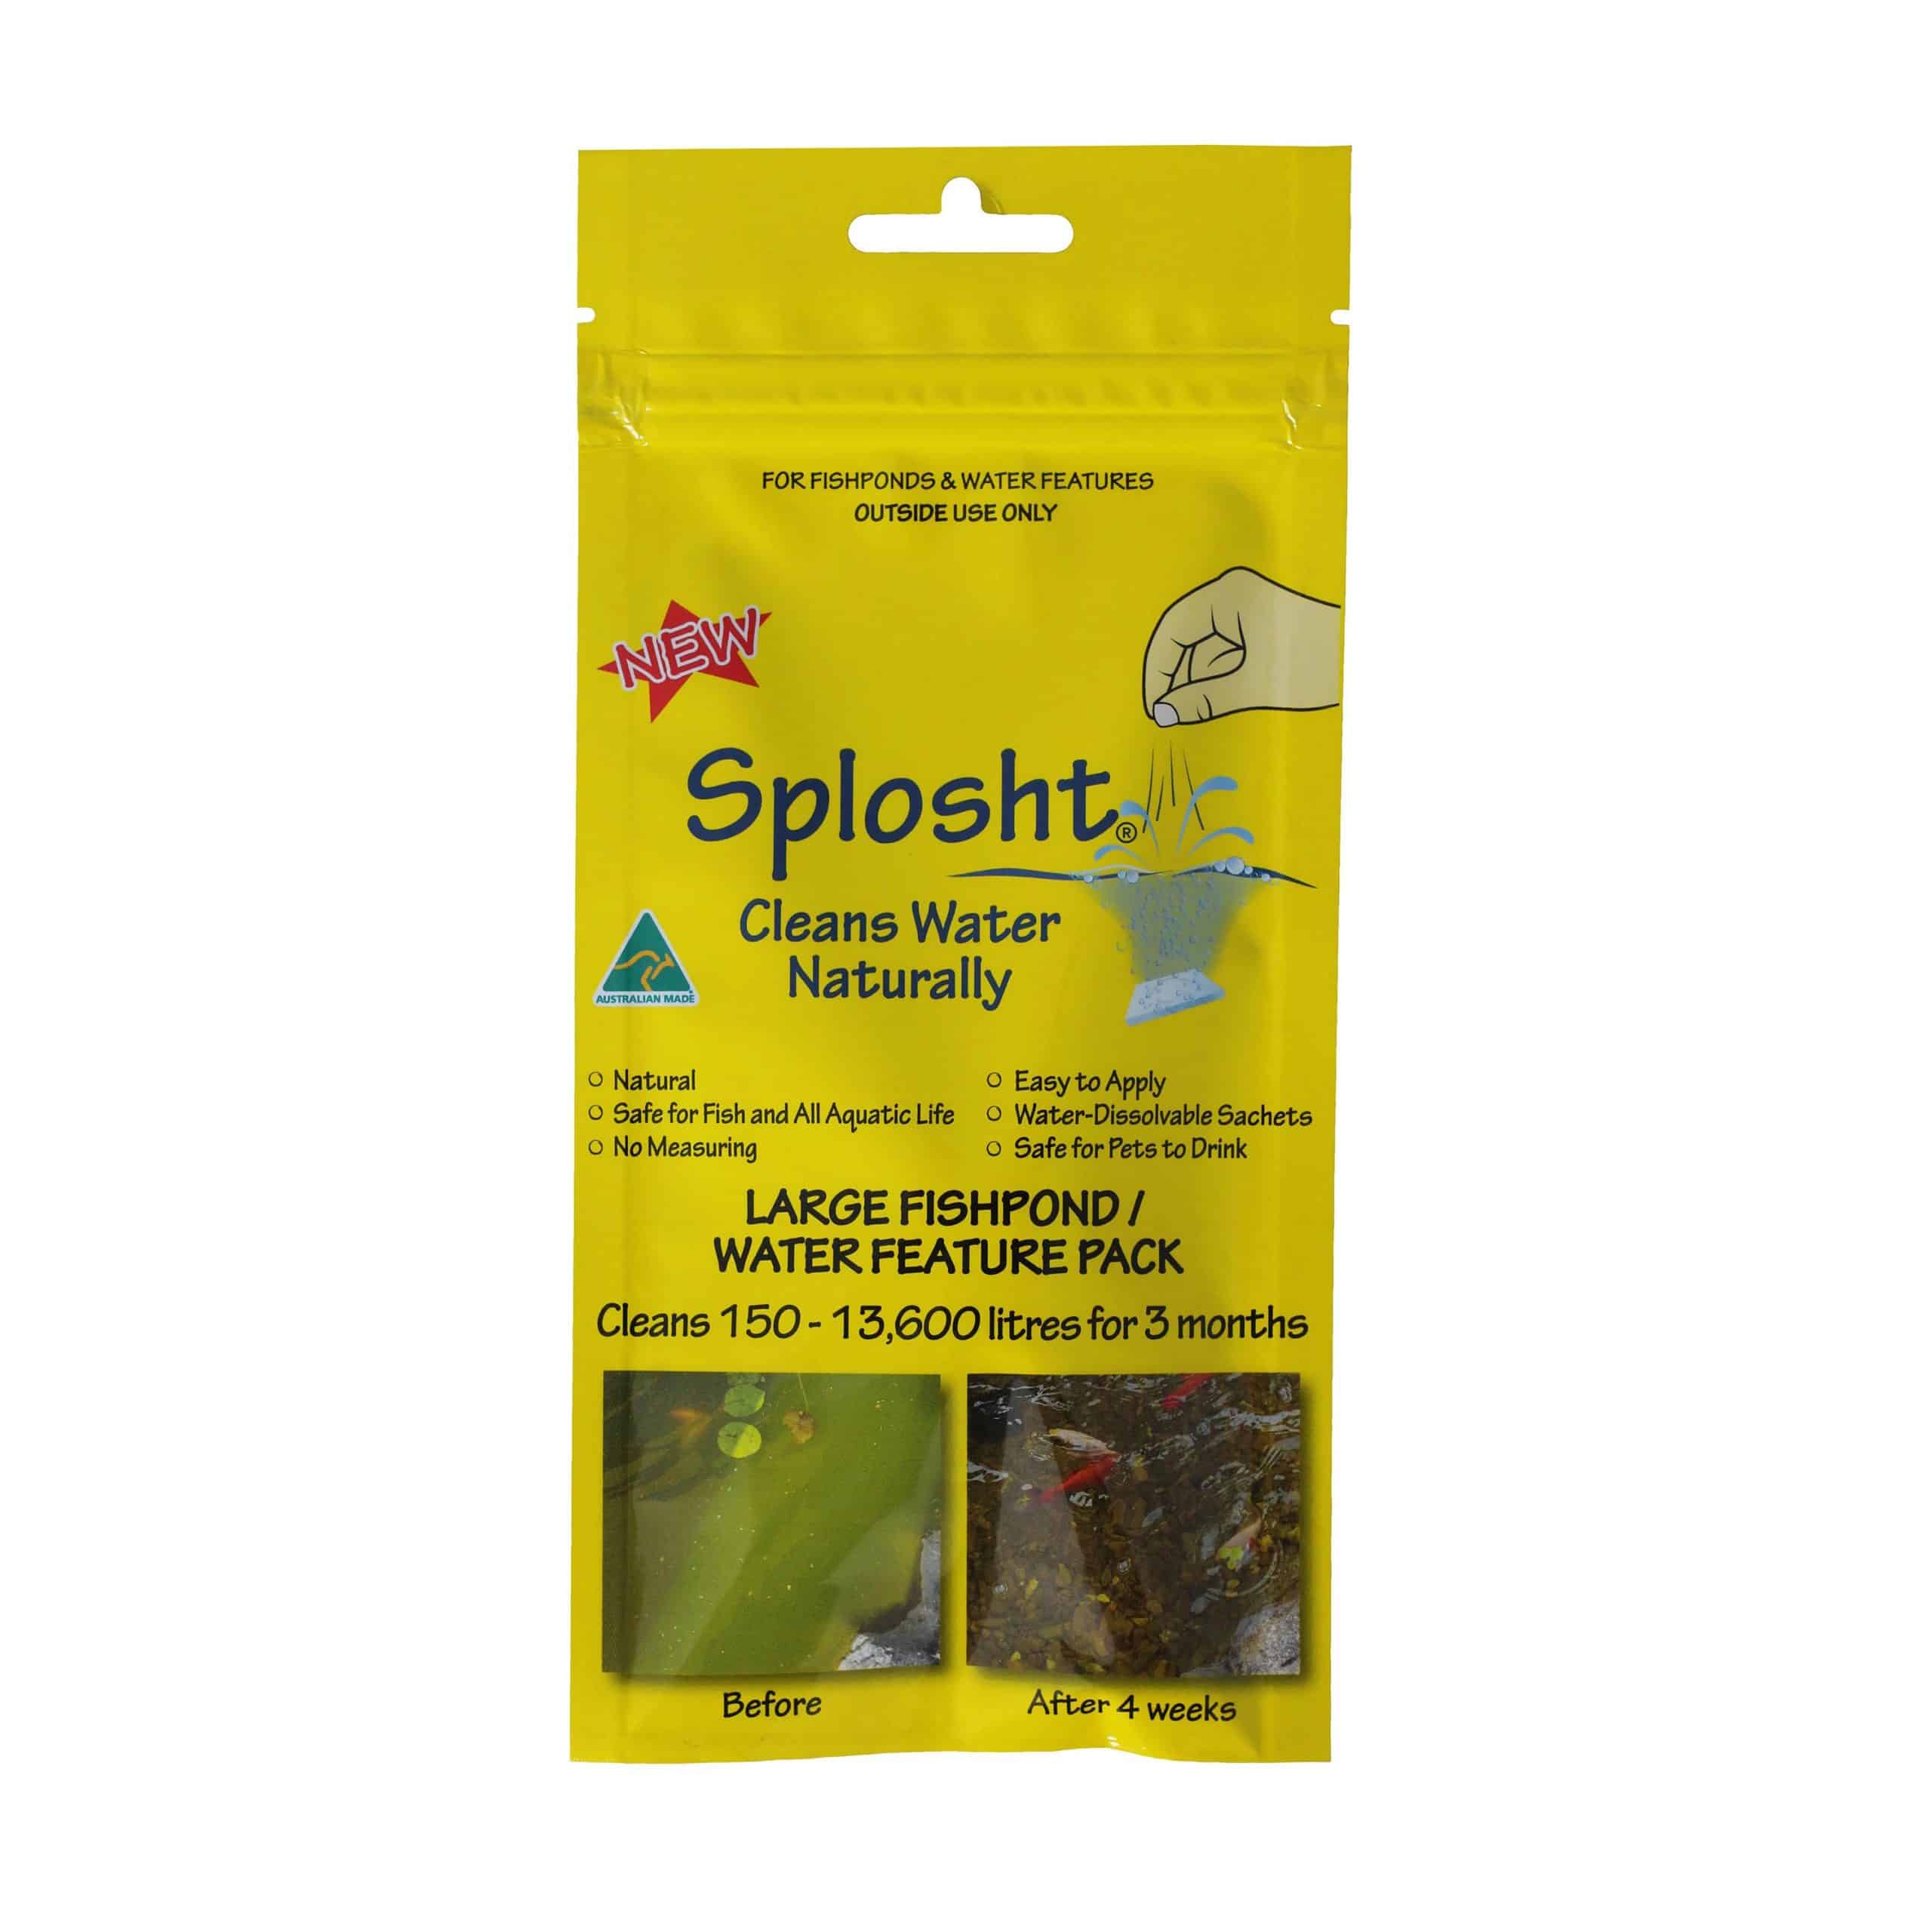 A pack of splosht for cleaning large fishponds